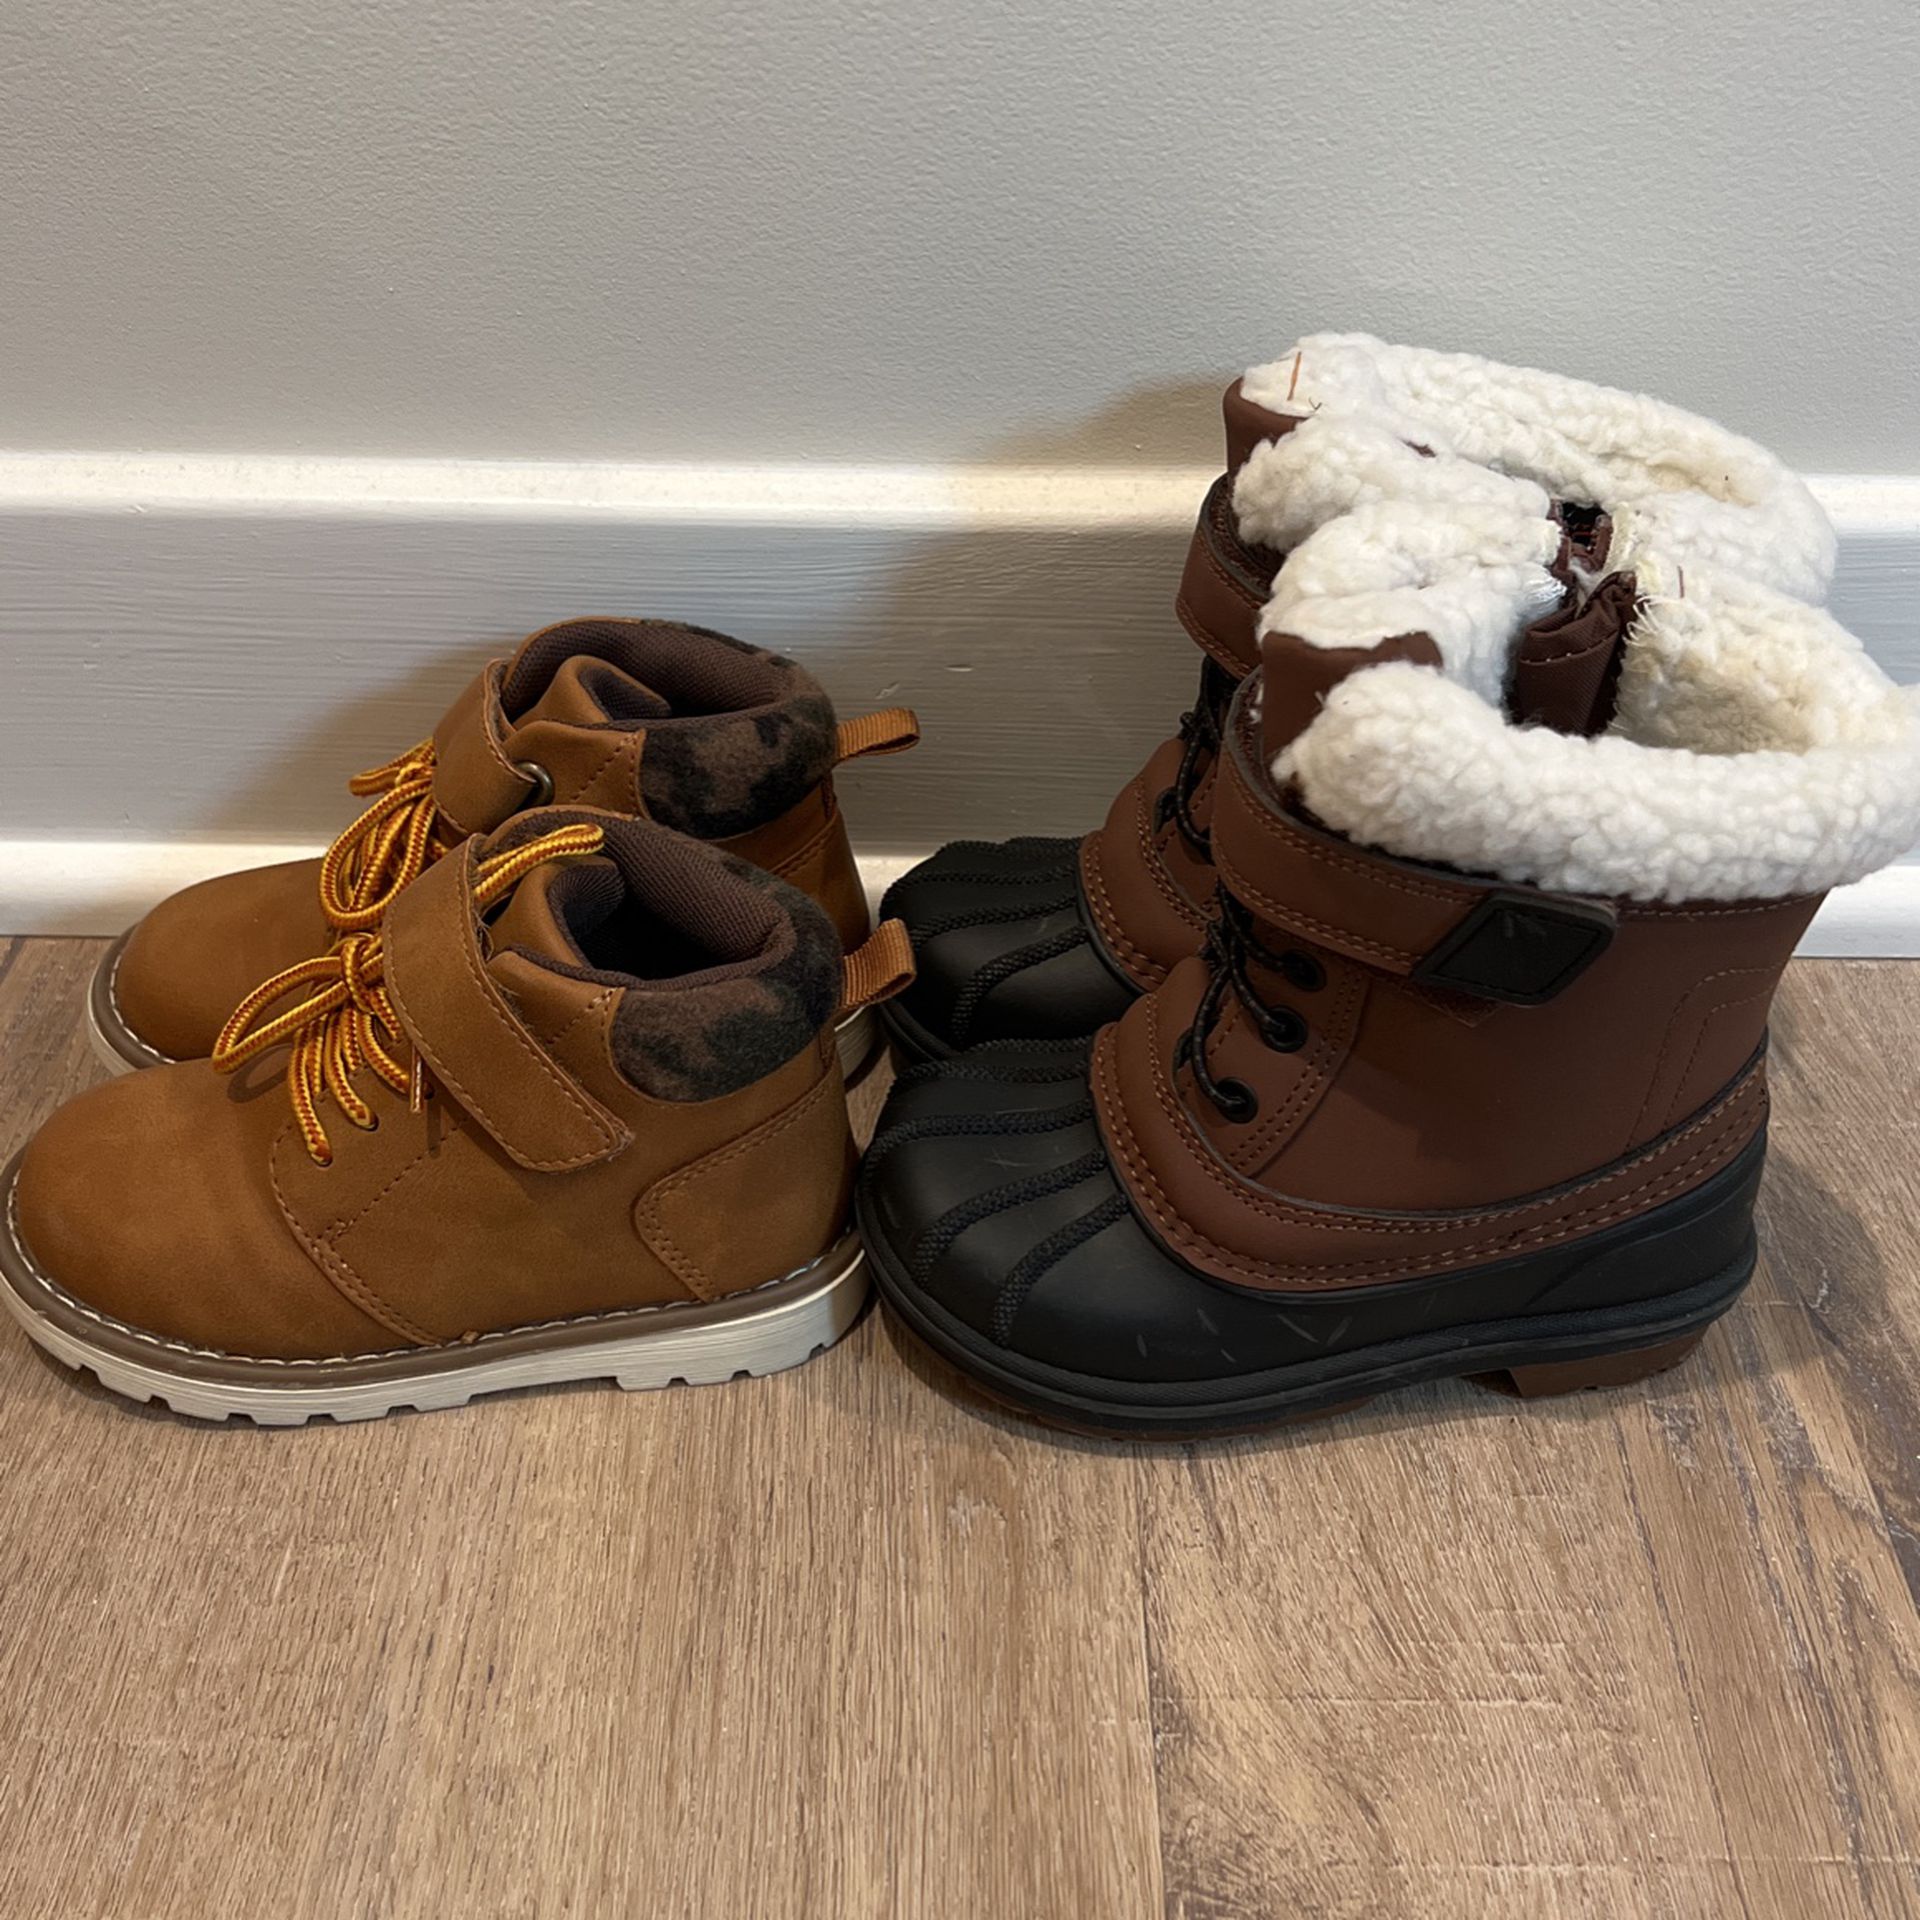 Toddler Boys Size 8 Winter Boots